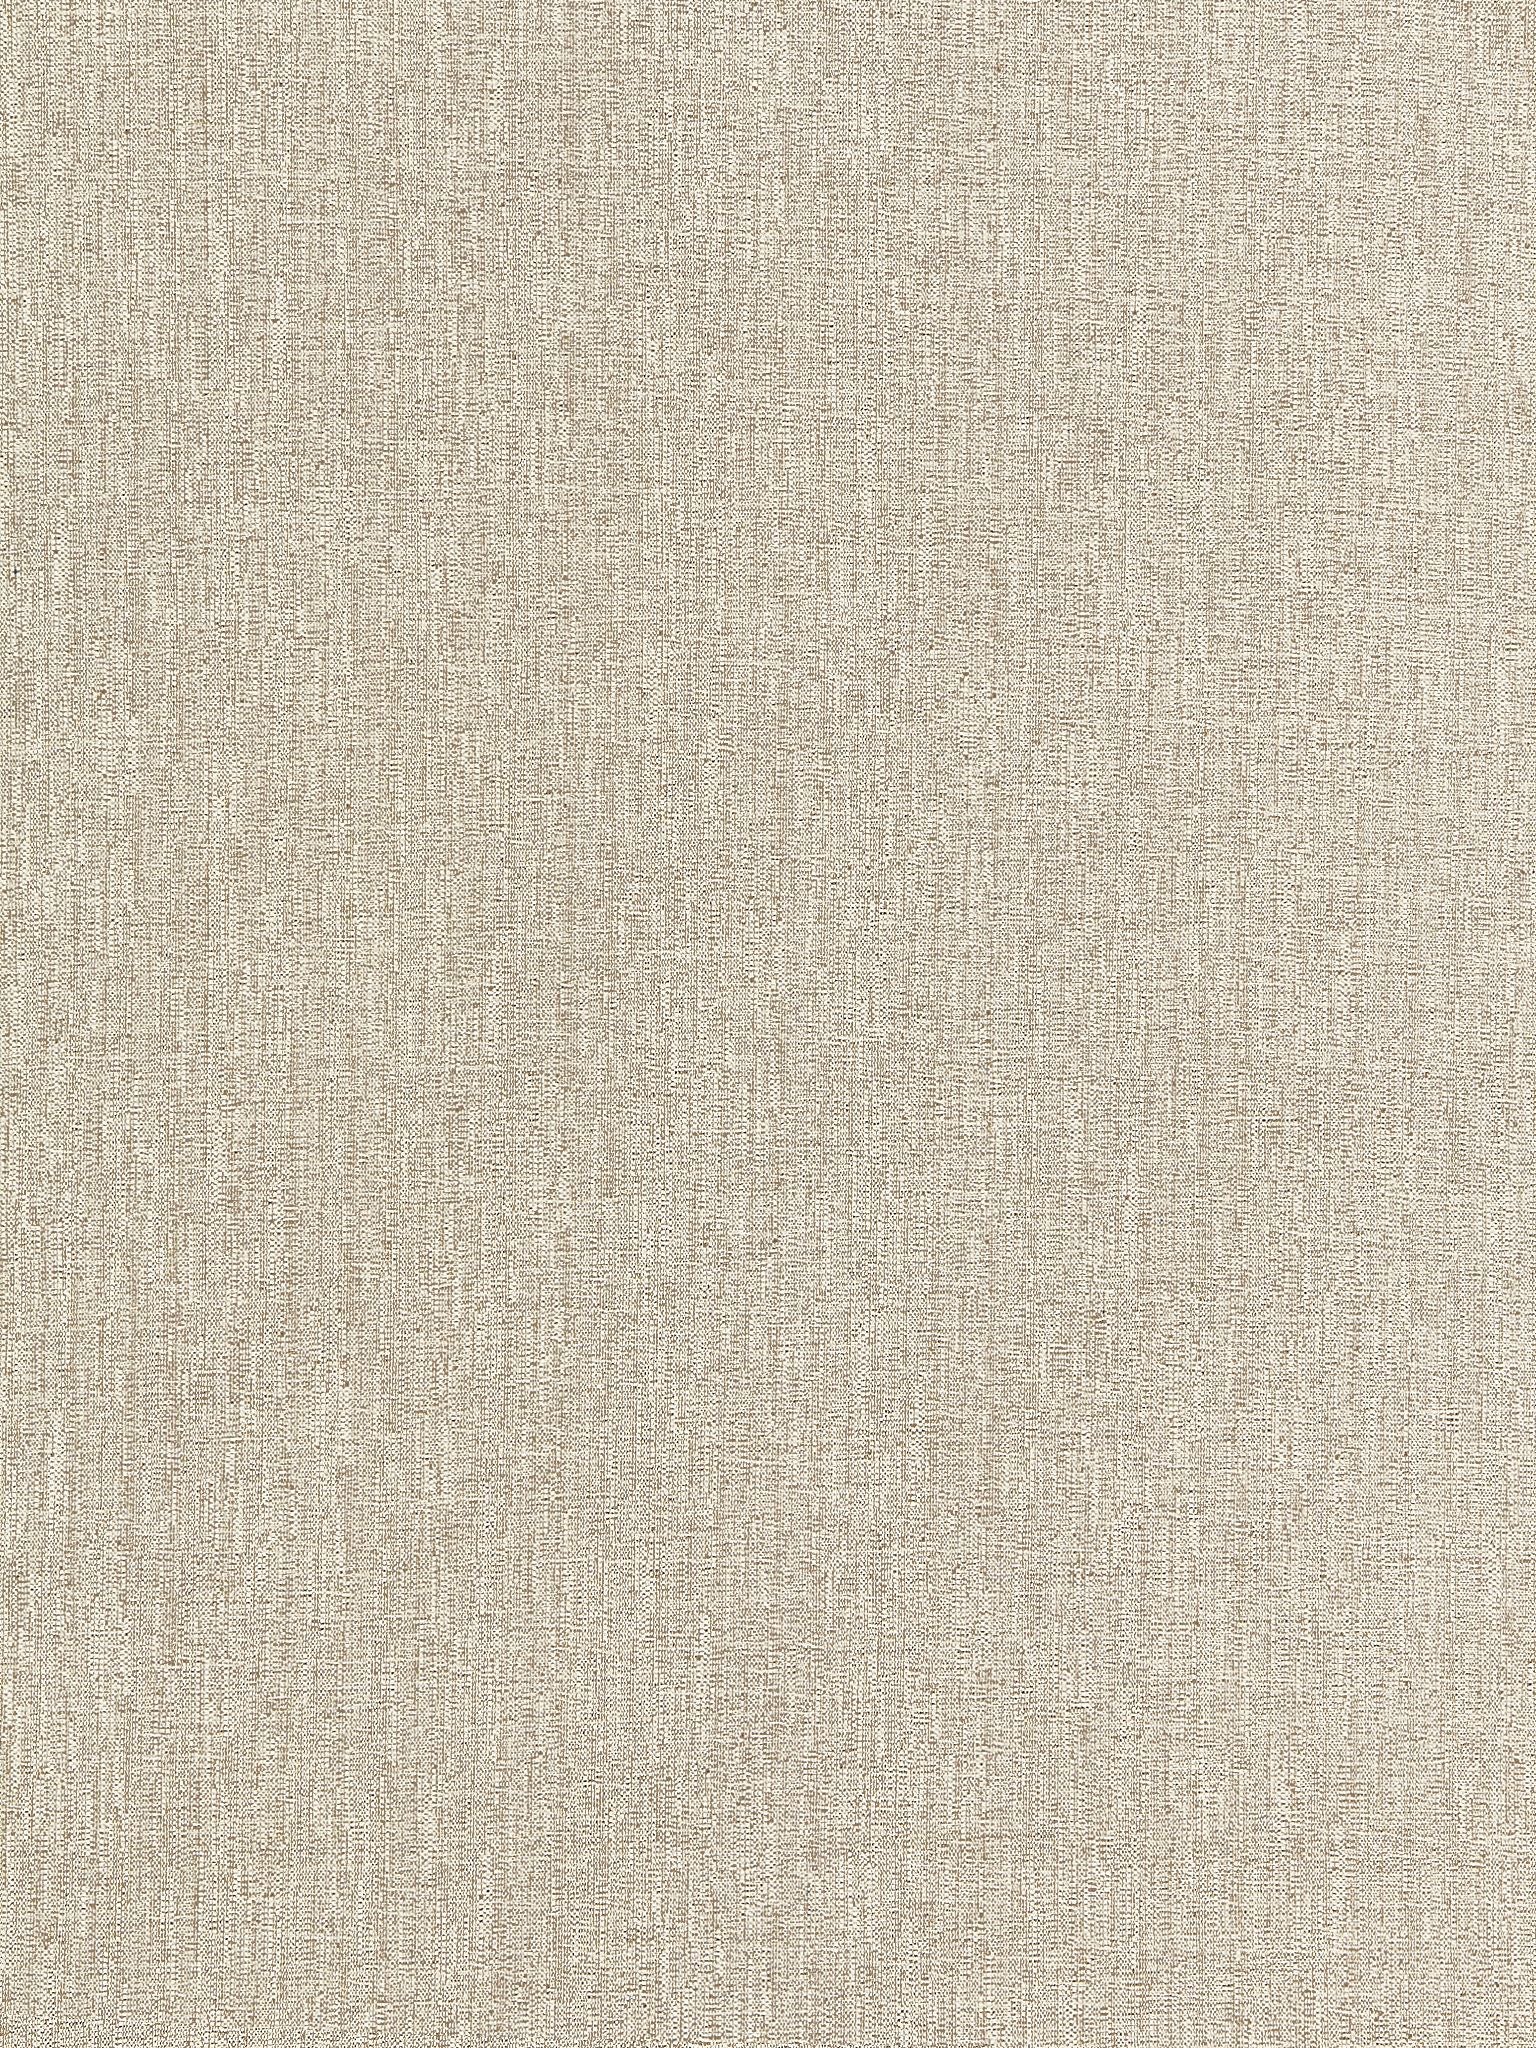 Spencer Chenille fabric in taupe color - pattern number BK 0002K65117 - by Scalamandre in the Old World Weavers collection